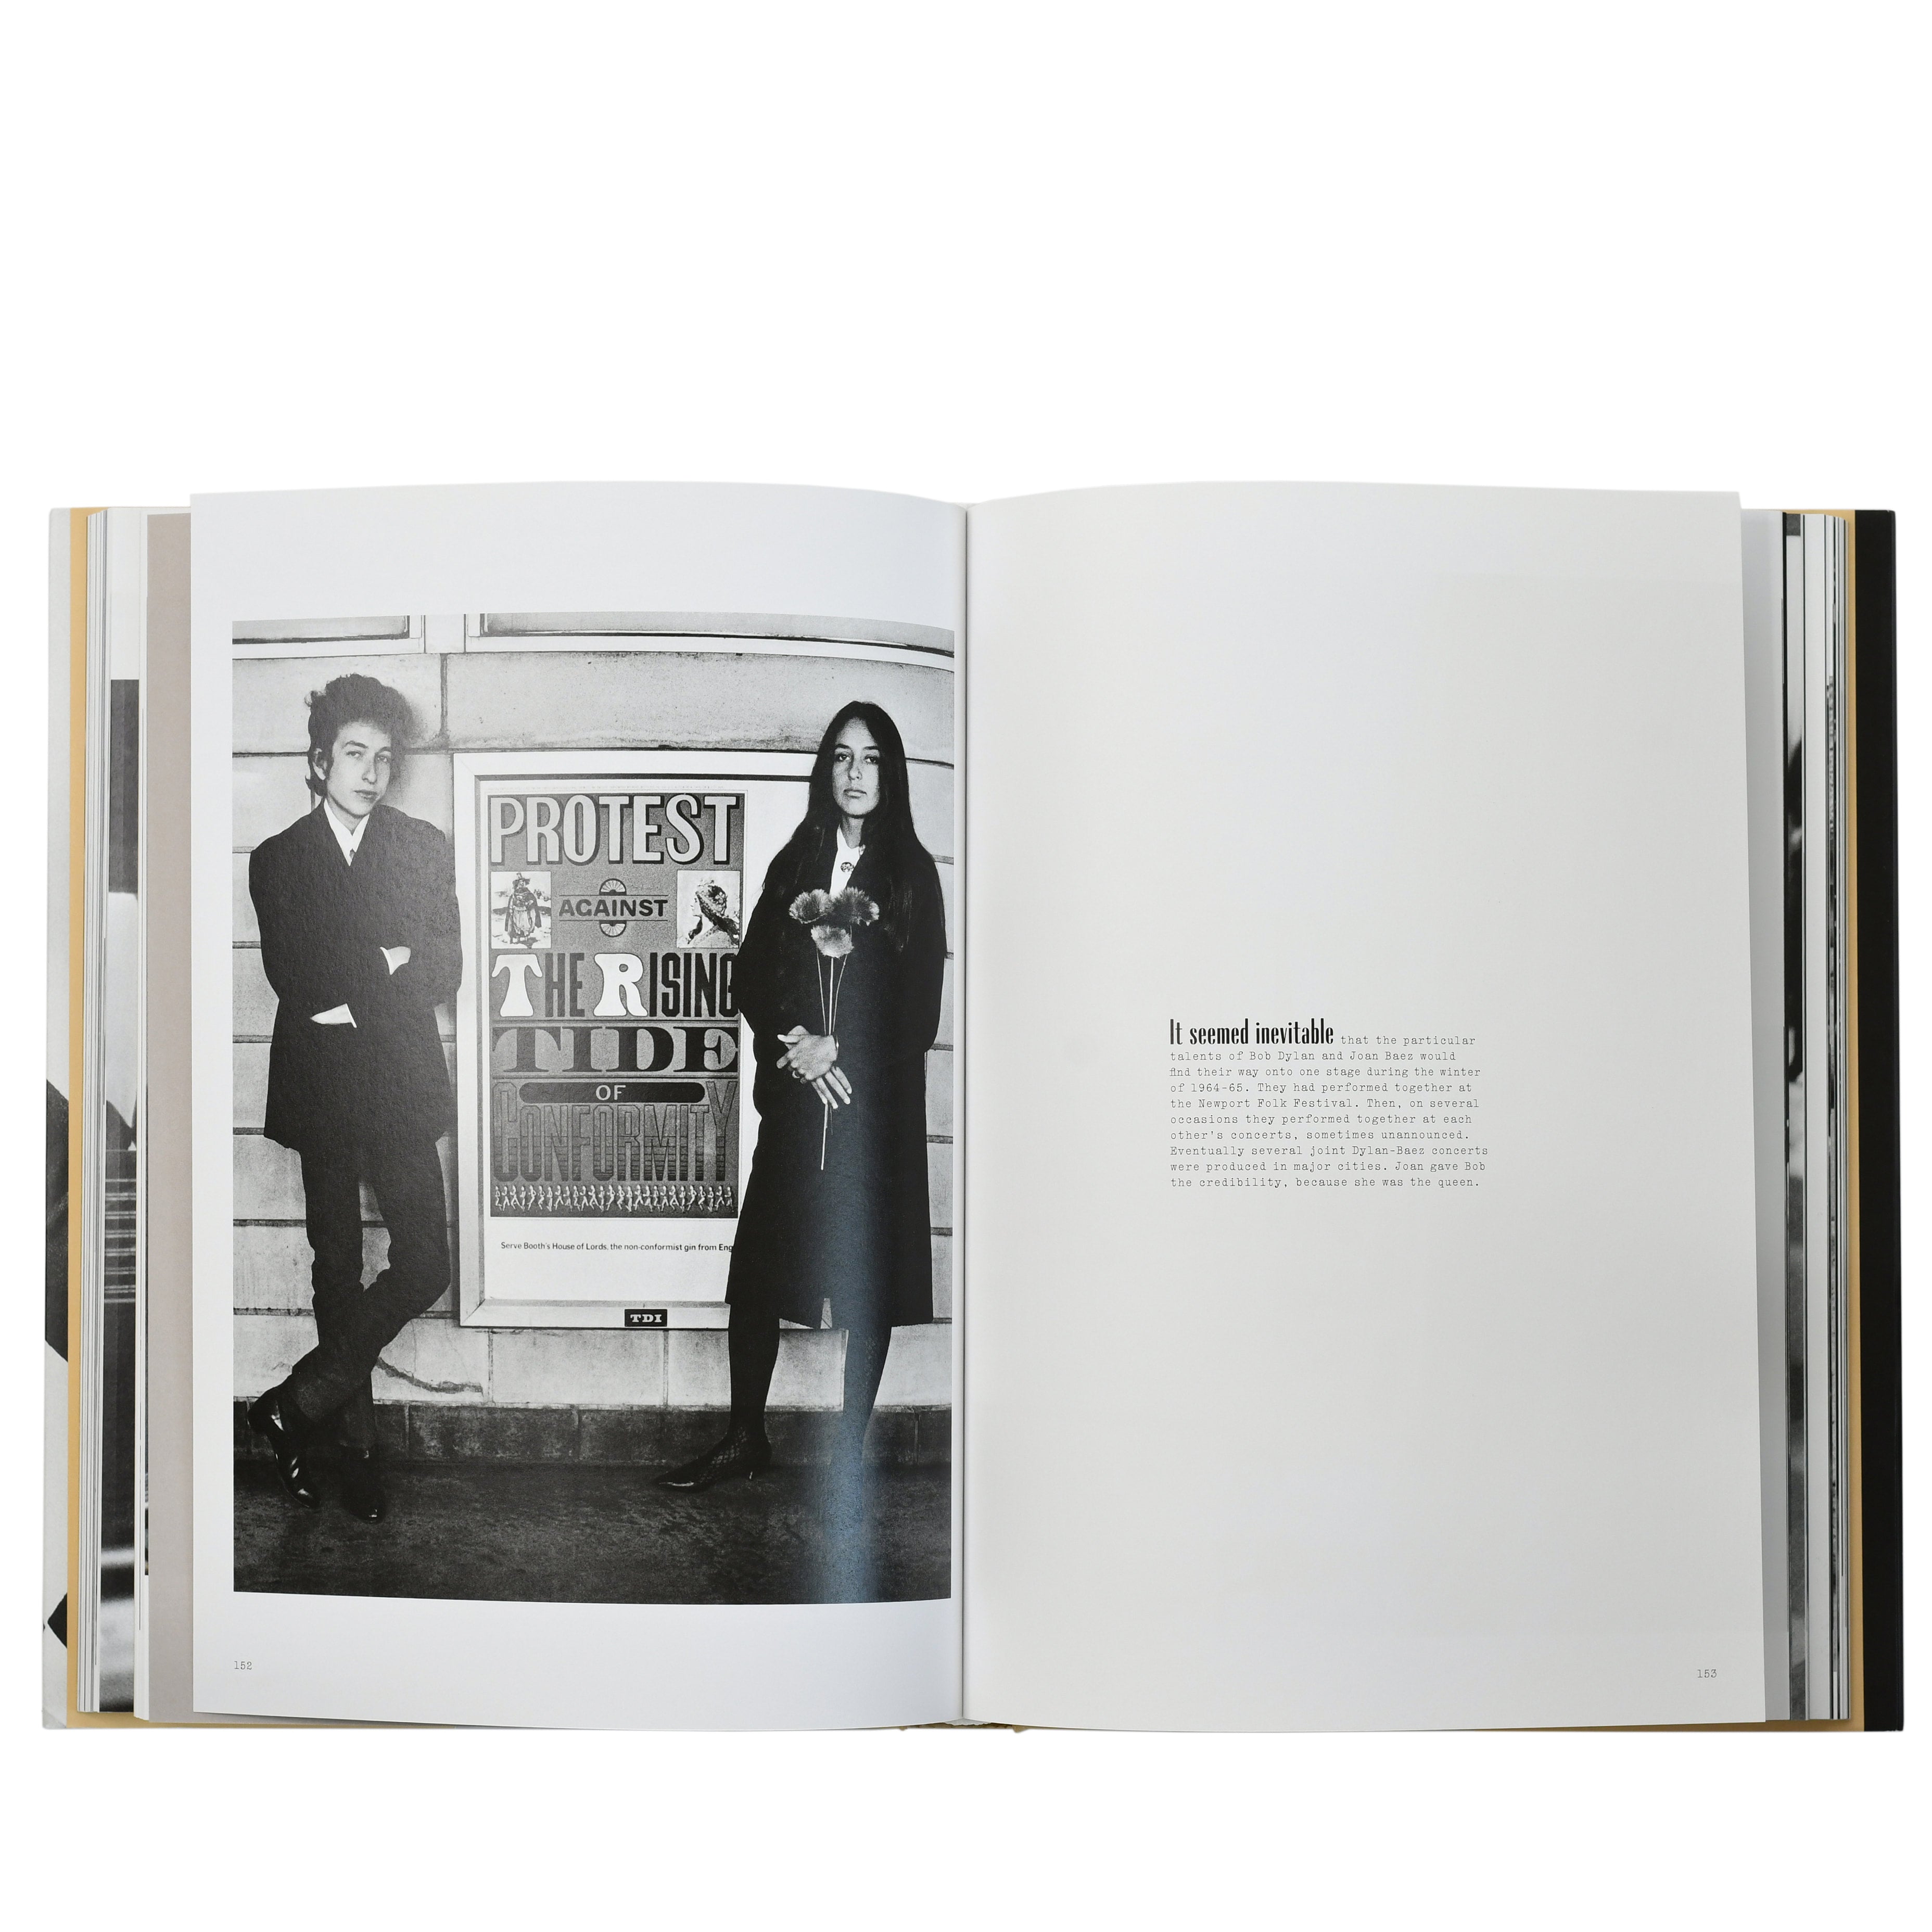 TASCHEN - BOB DYLAN - A YEAR AND A DAY BOOK